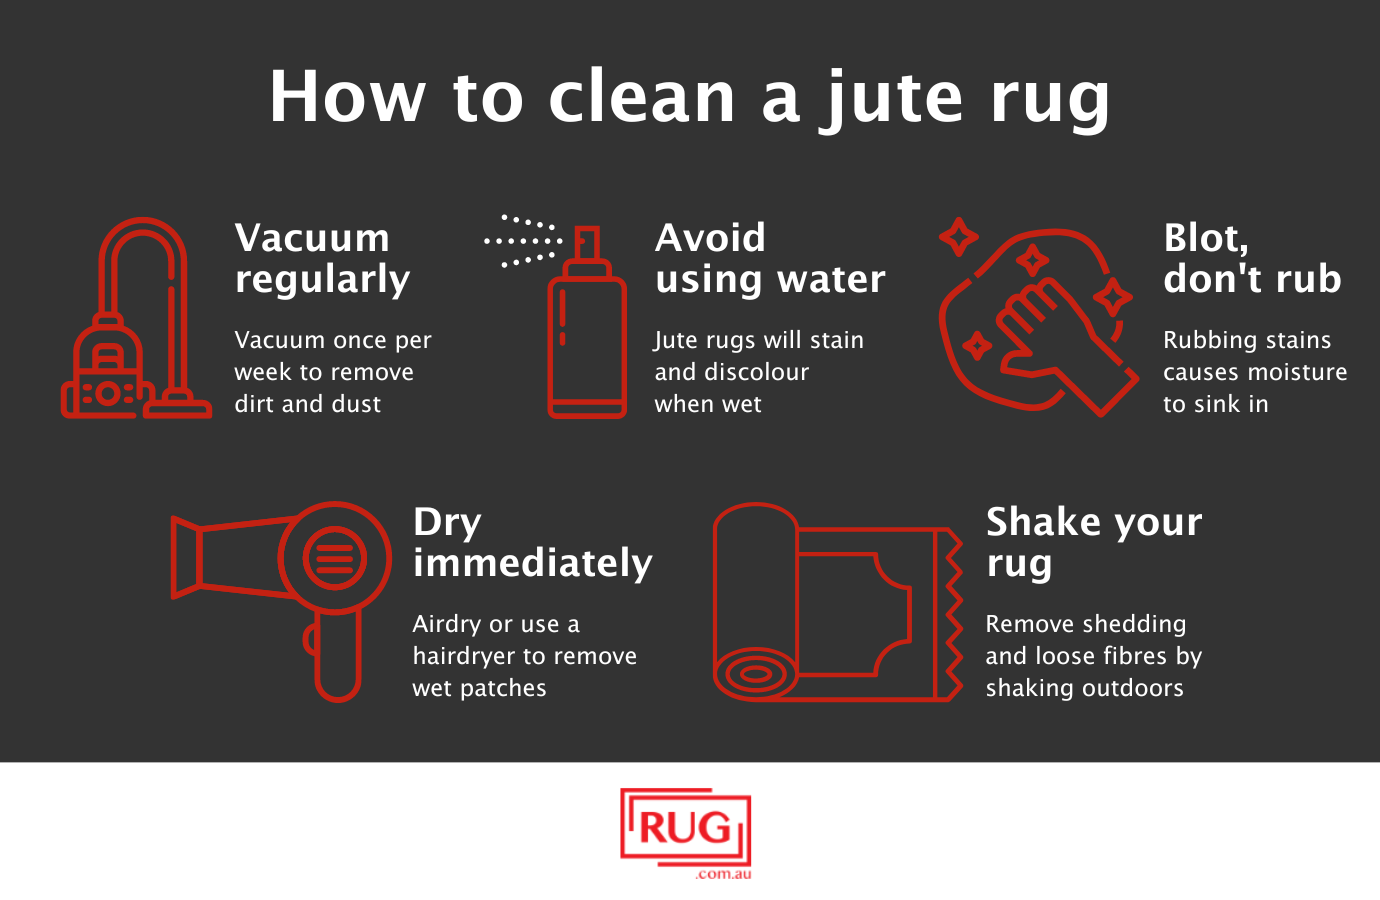 how to clean a jute rug